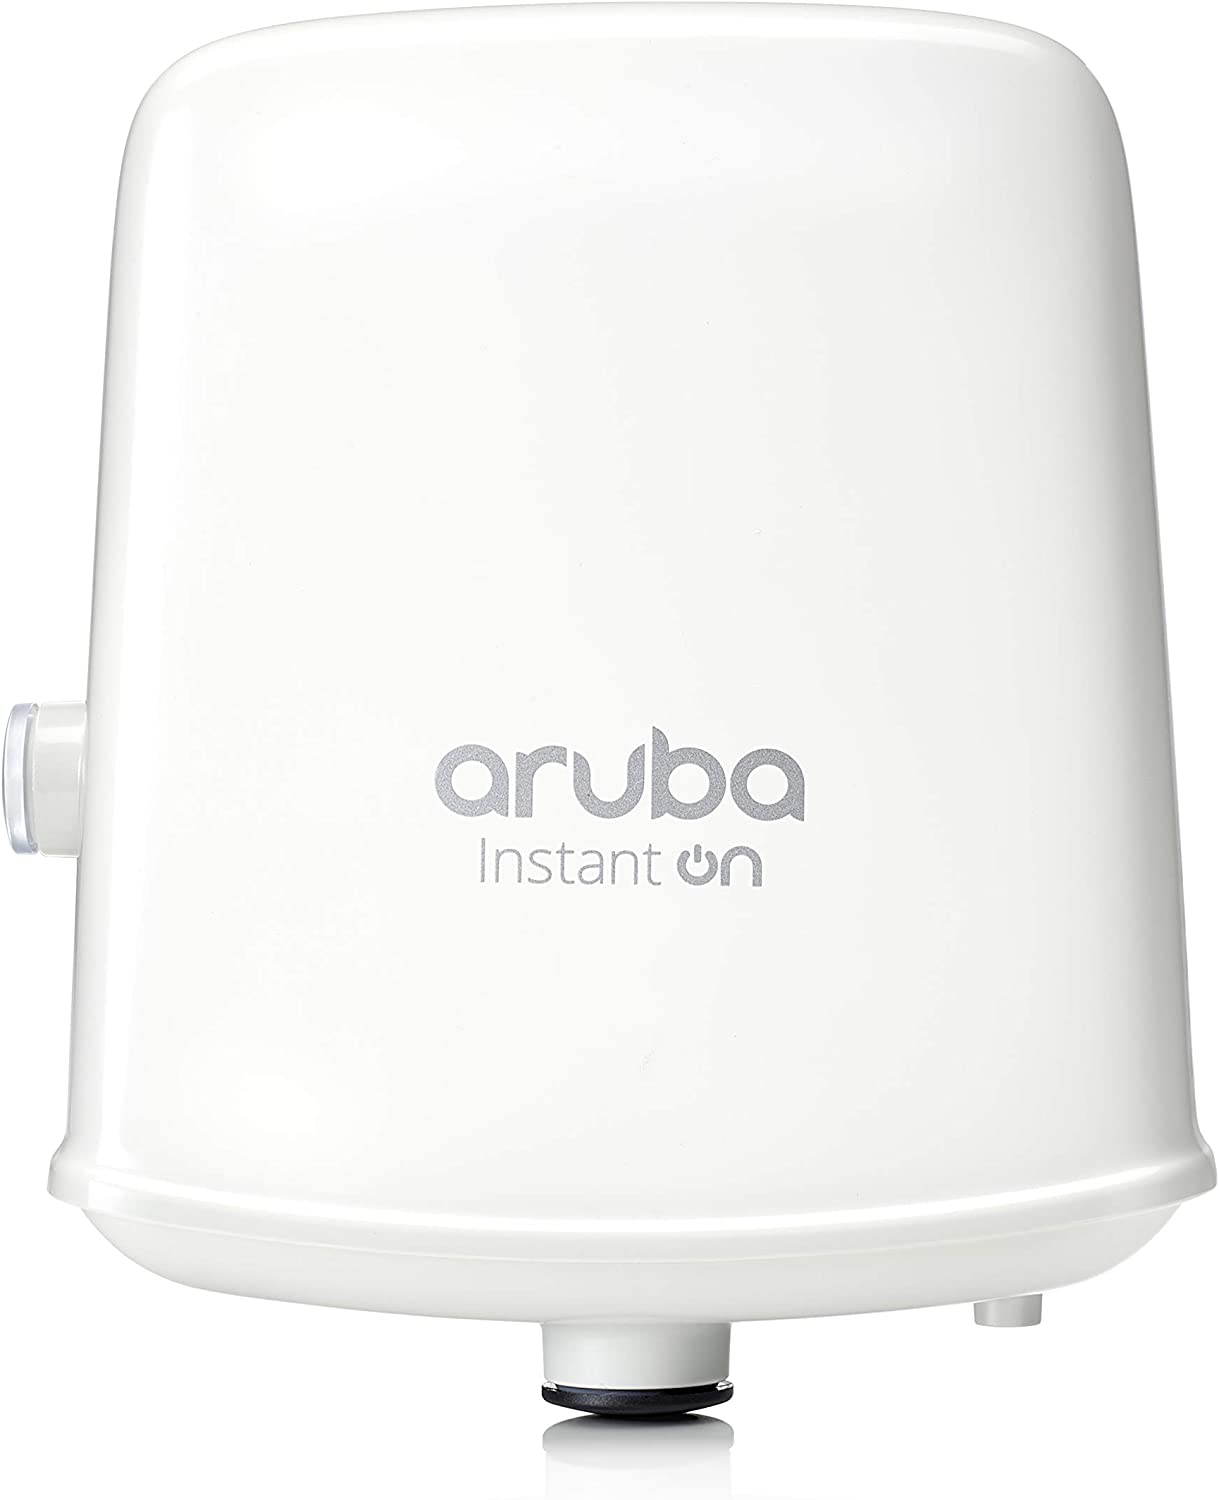 Aruba Instant On AP17 2x2 Outdoor Access Point, RW Rest-of-World Model, R2X11A